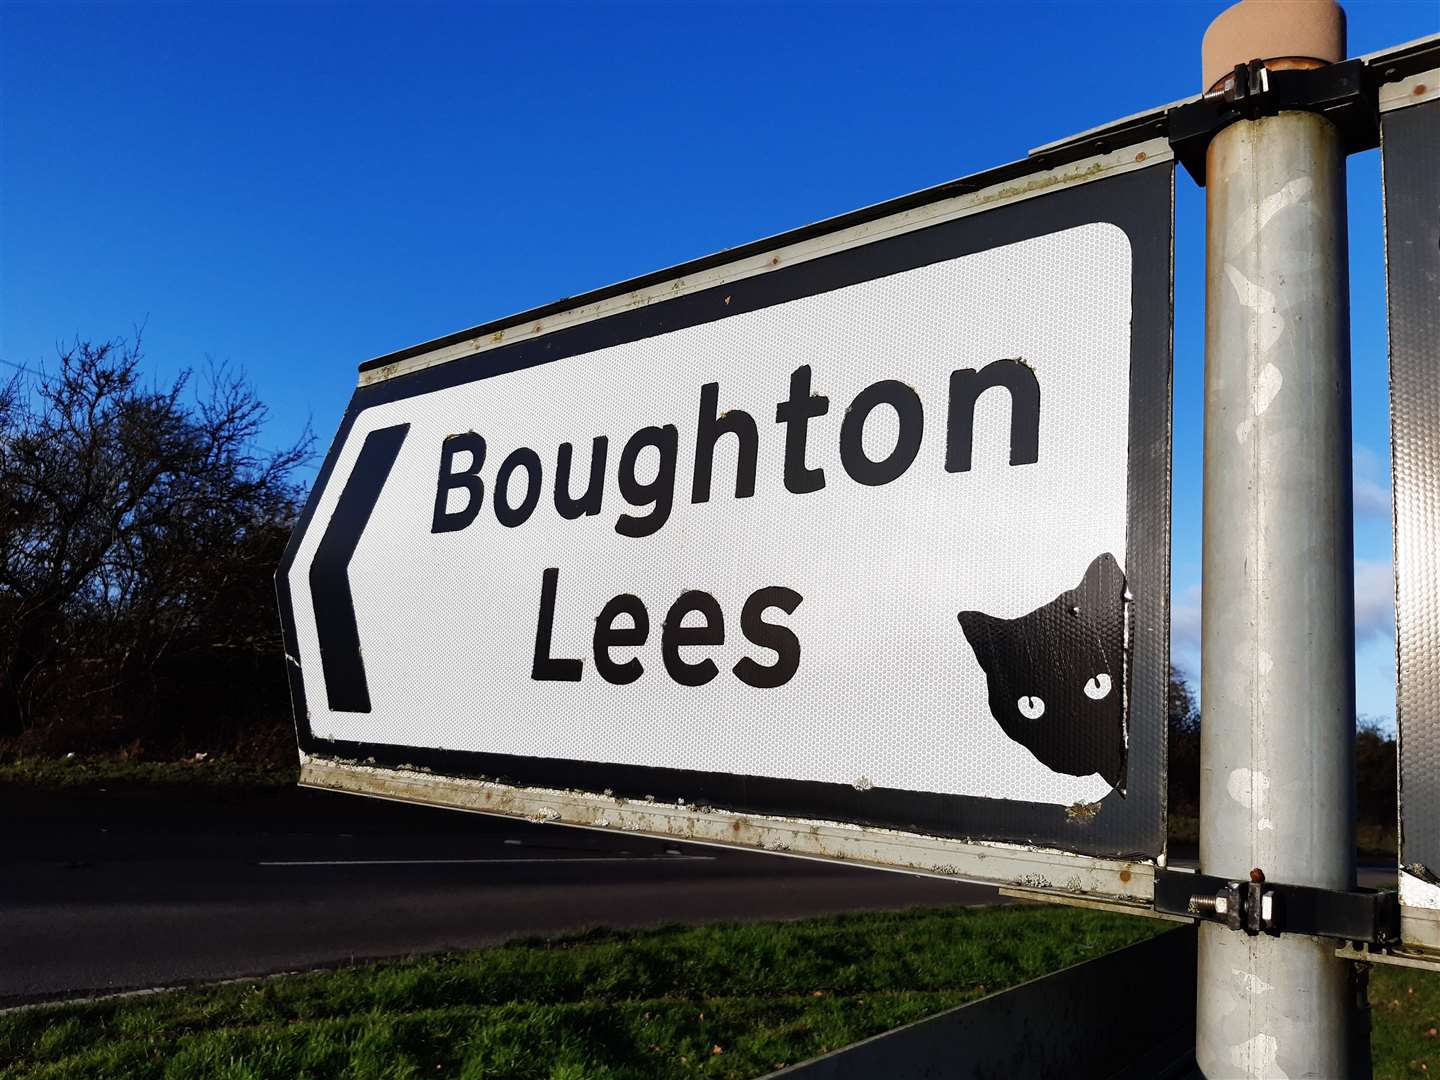 A cat was spotted on a sign at the junction between the A28 and Harville Road just outside Wye